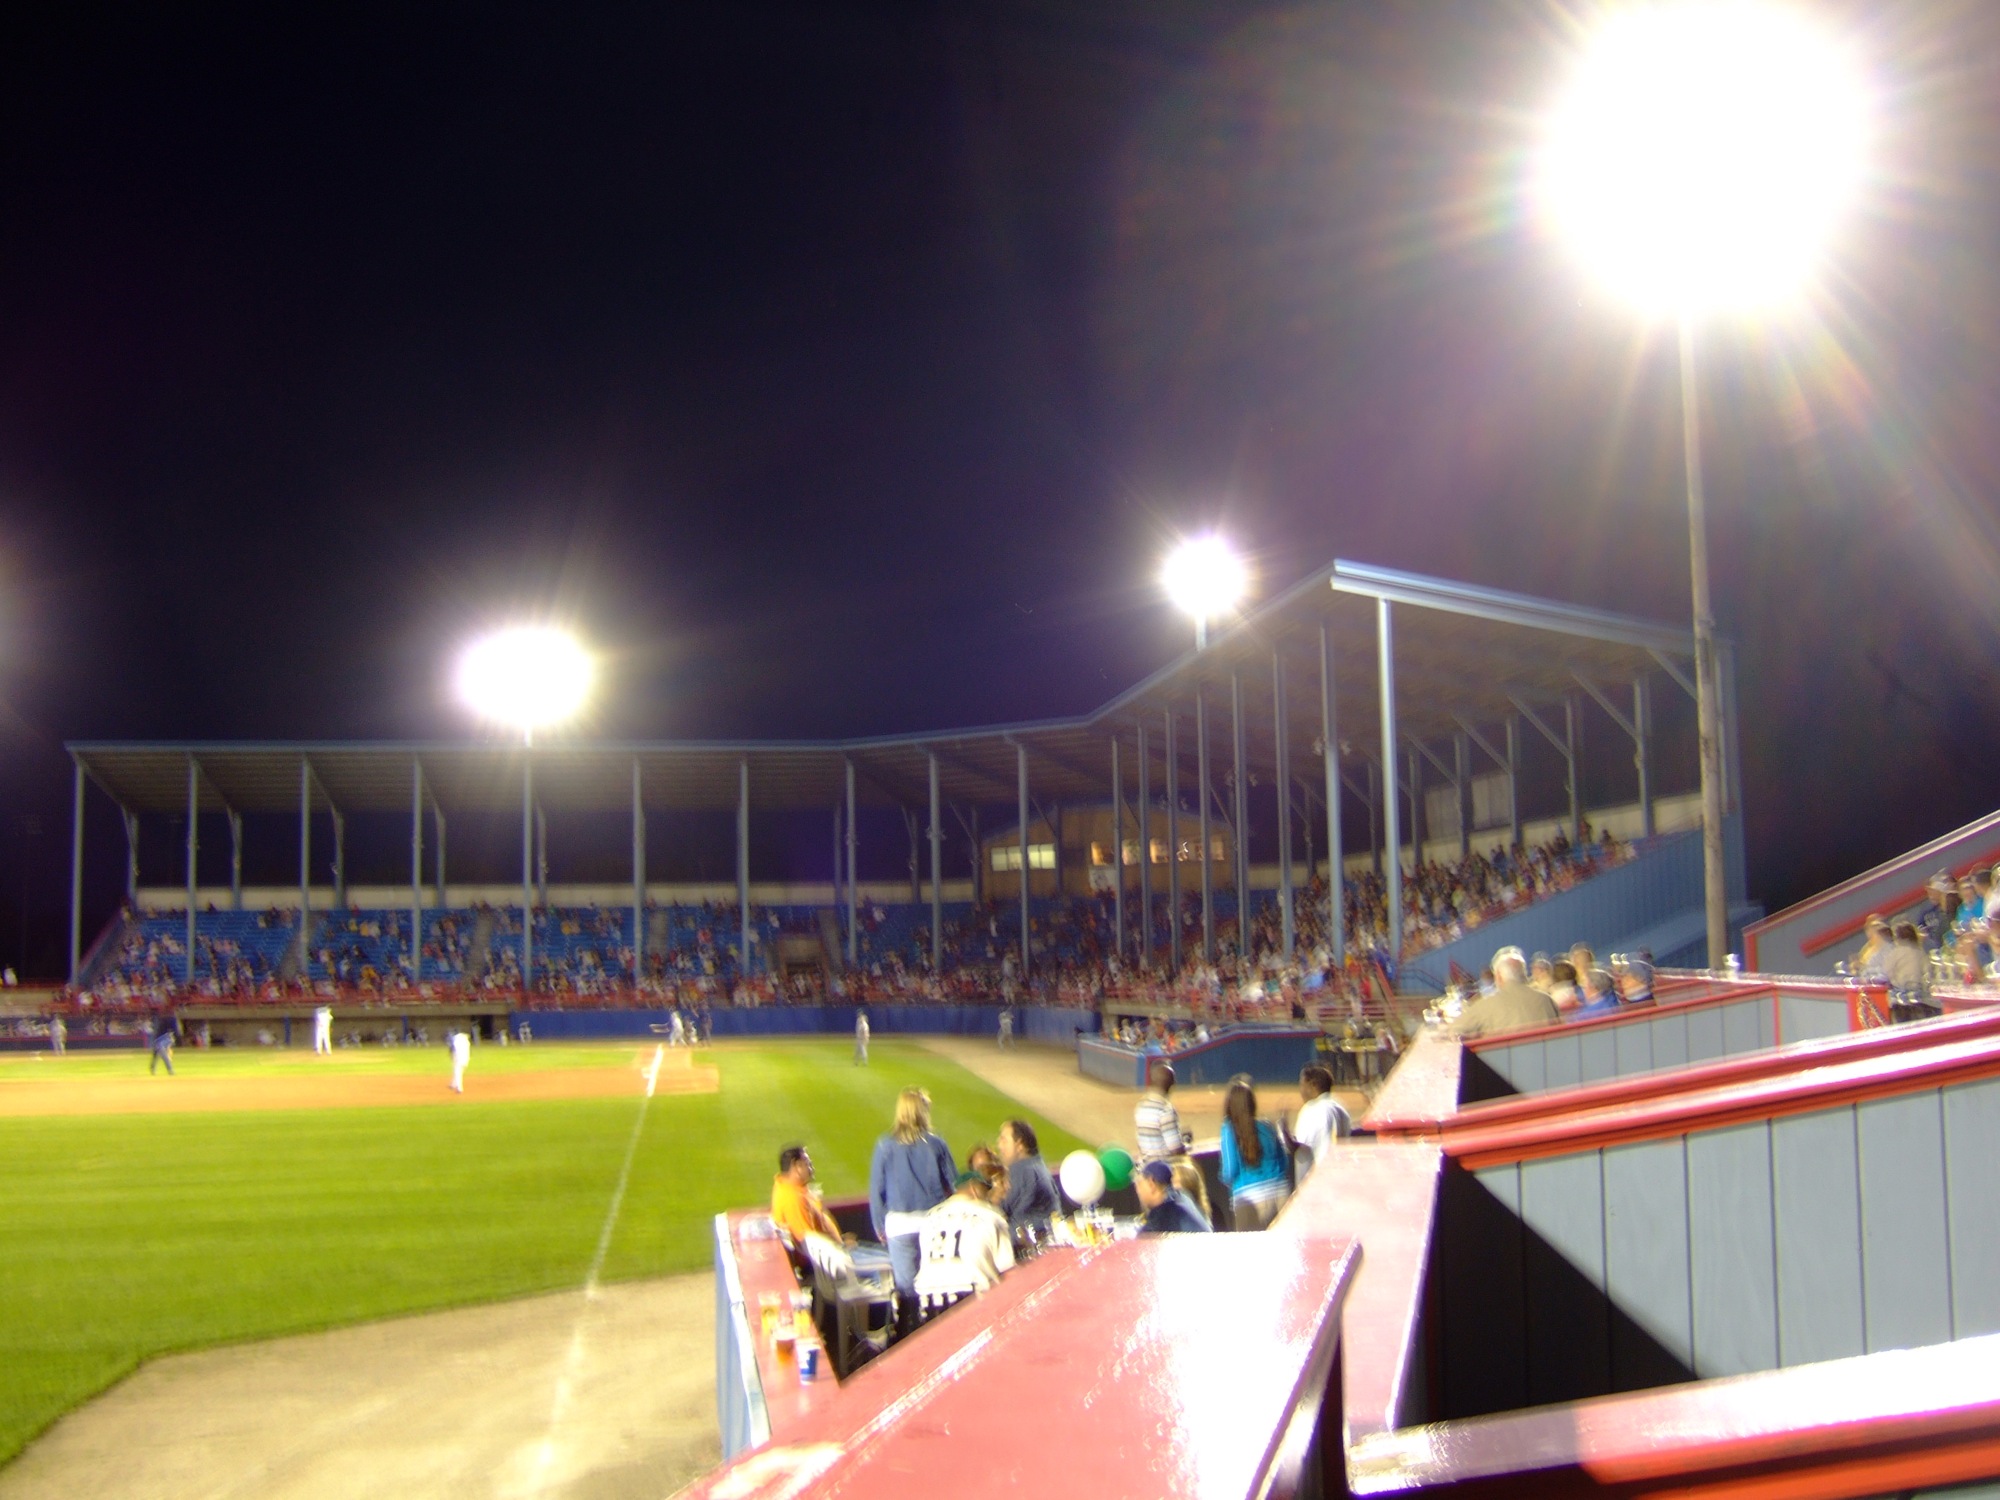 many people are on a stadium watching a baseball game